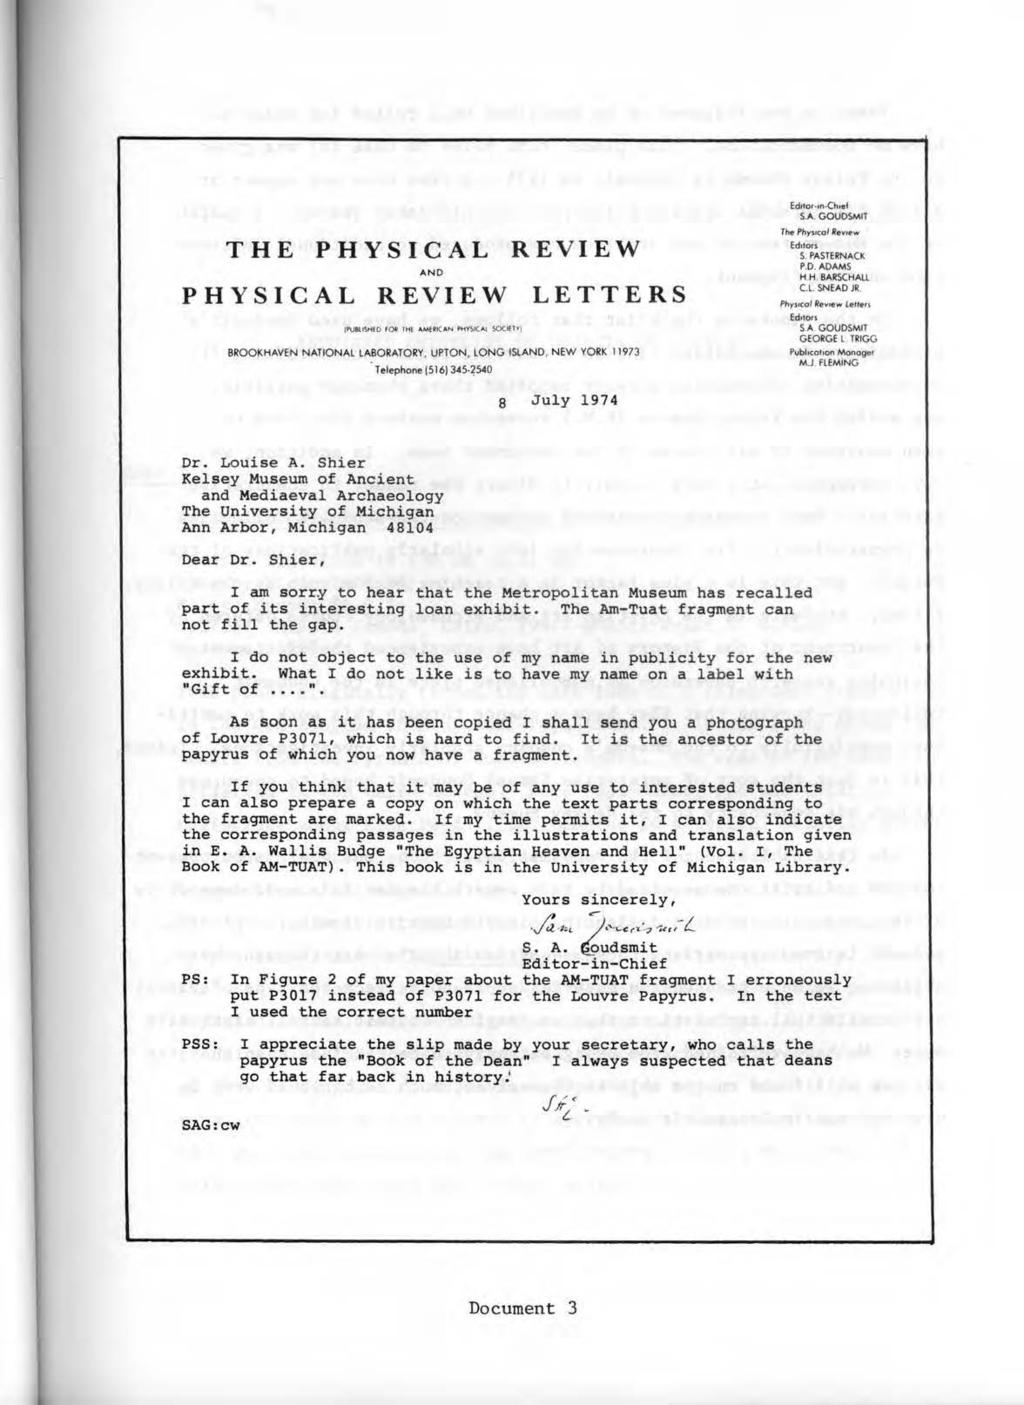 THE PHYSICAL REVIEW AN D PHYSICAL REVIEW LETTERS 8R00KHAIIEN N ATIONAL LABO RATORY, UPTON, LONG ISlAND. NEW YORK 11 973 Telephone (5 1613~ 5-?S..O Edltor..n Ch ef S.A. GOUOSMIT r~ PhysKol Rev w EdiiOU S.